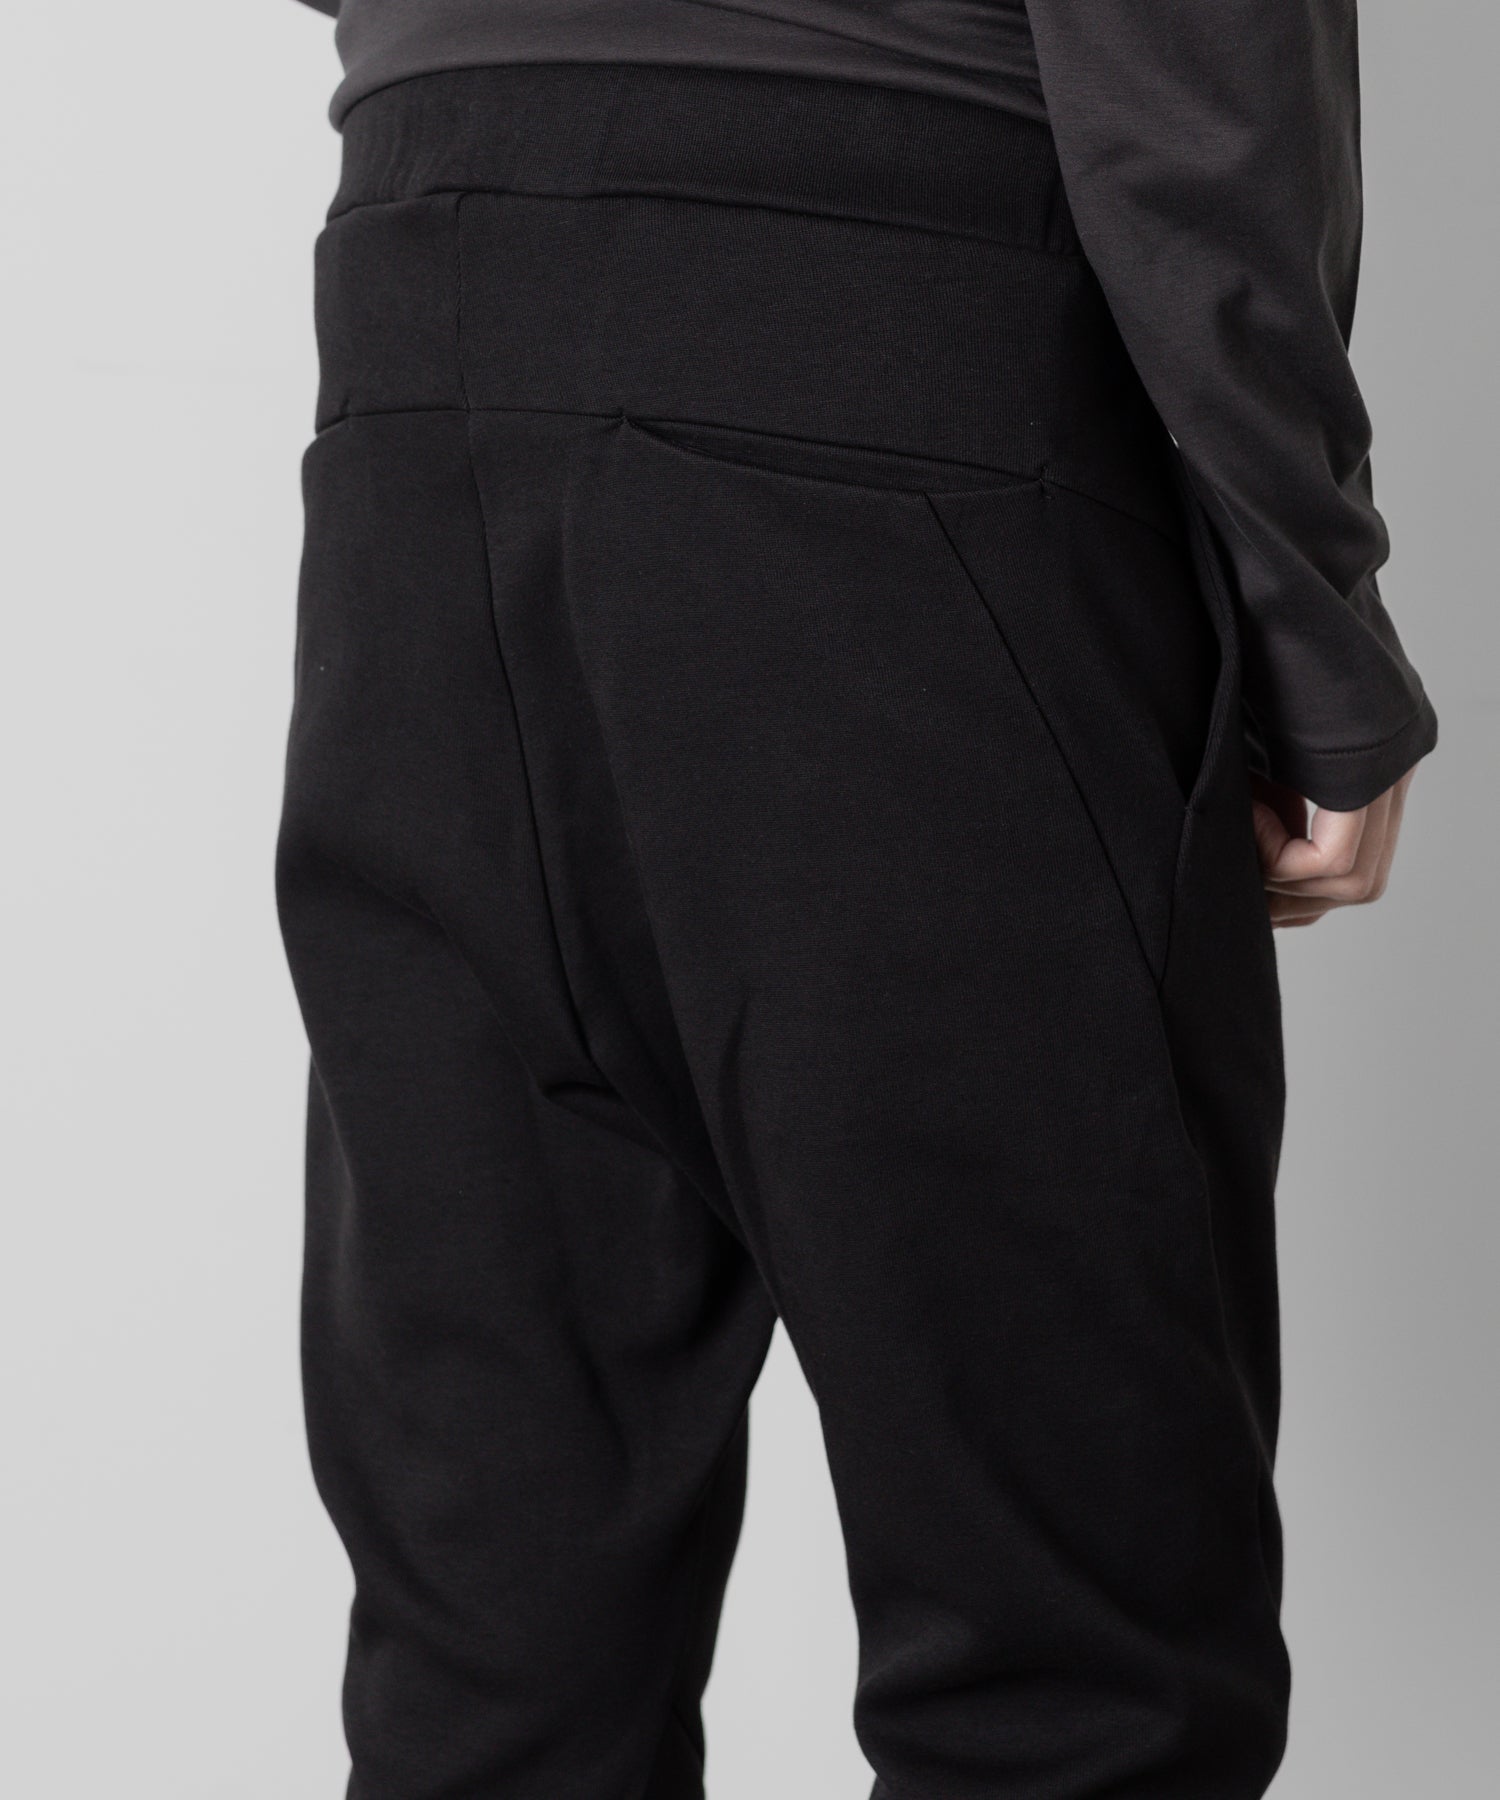 【ATTACHMENT】ATTACHMENT アタッチメントのCO/PE DOUBLE KNIT THREE DIMENSIONAL WIDE PANTS - BLACK 公式通販サイトsession福岡セレクトショップ